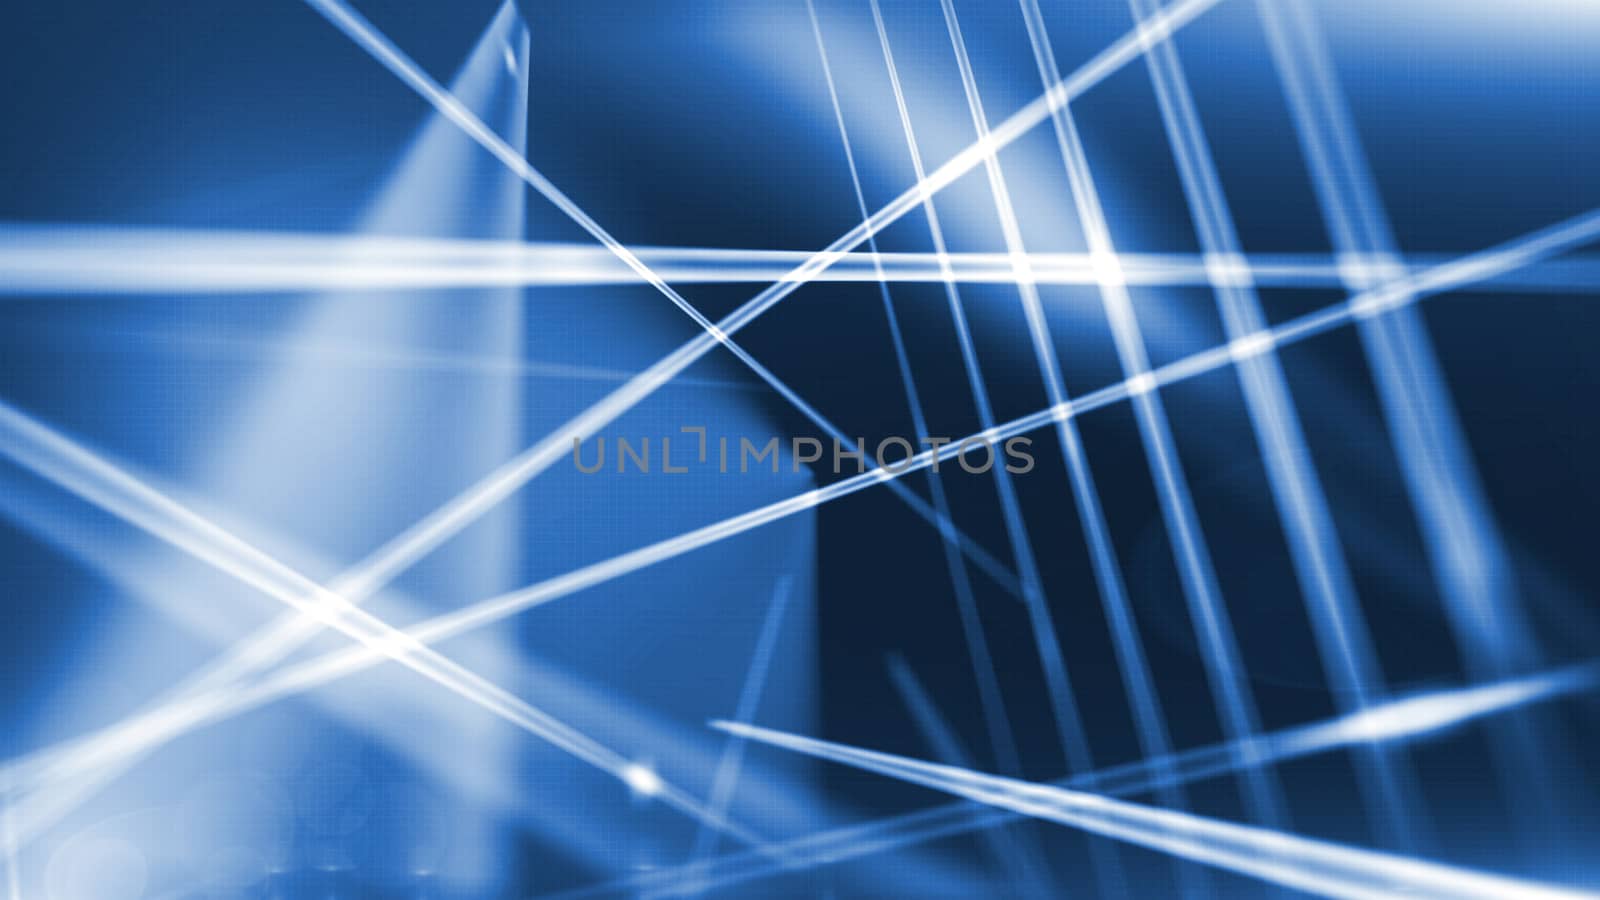 glowing vertical and horizontal lines on a blue background